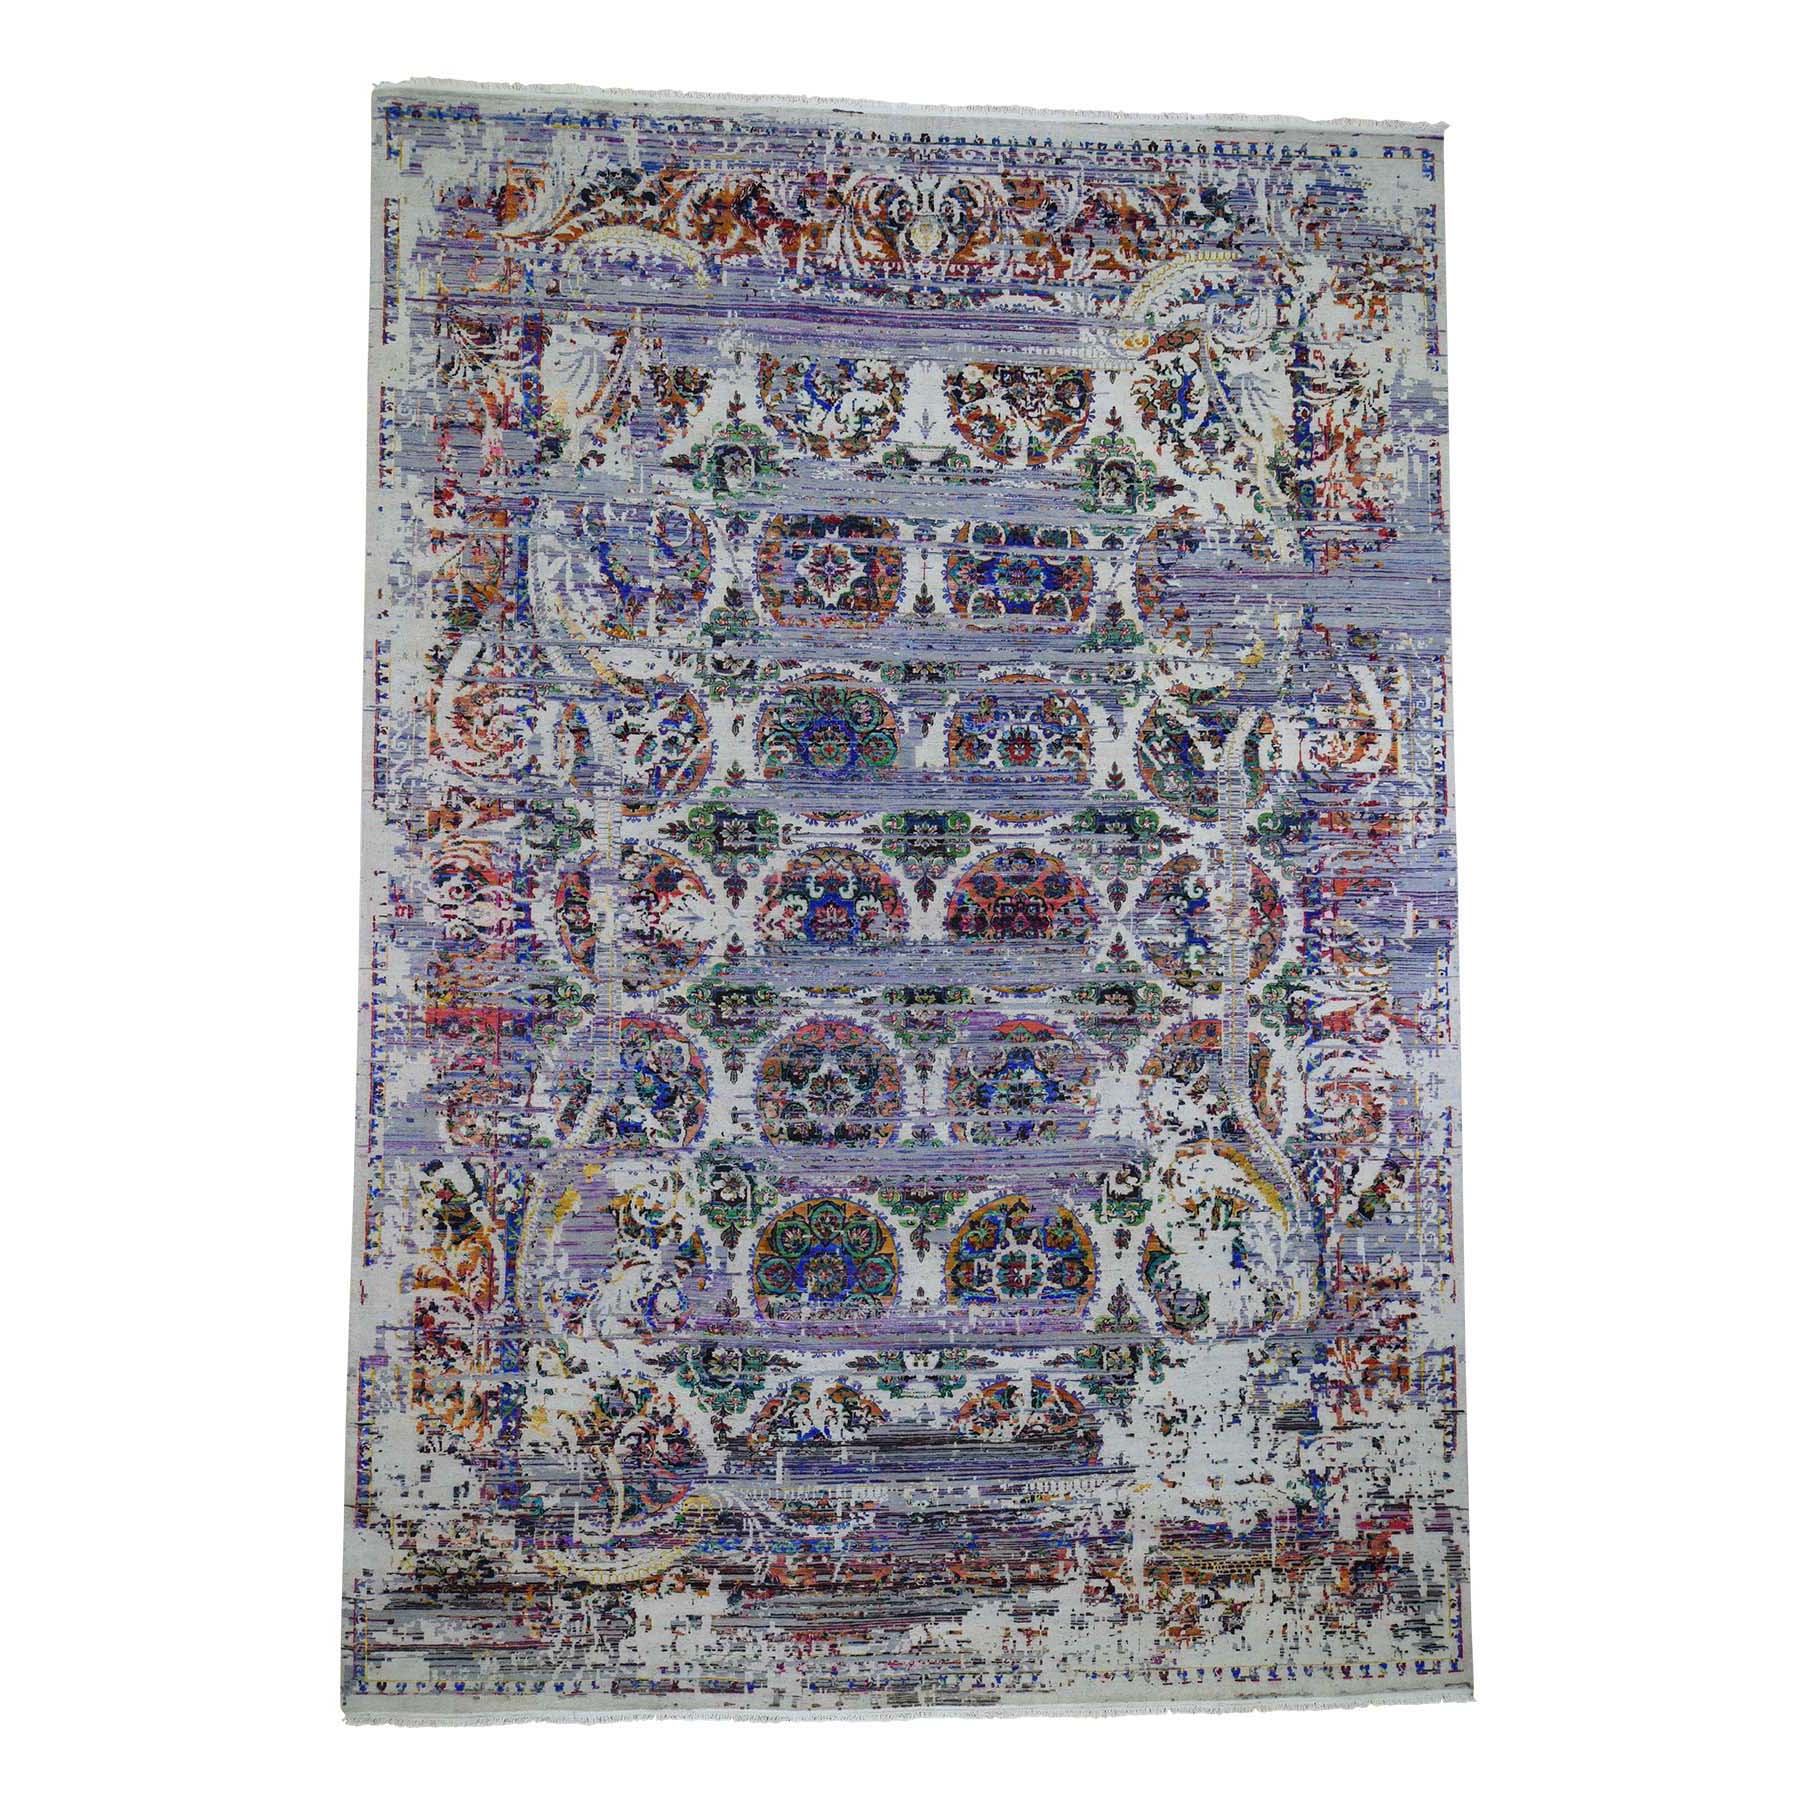 9'10"x14'3" ERASED ROSSETS, Colorful Sari Silk With Textured Wool Hand Woven Oriental Rug 